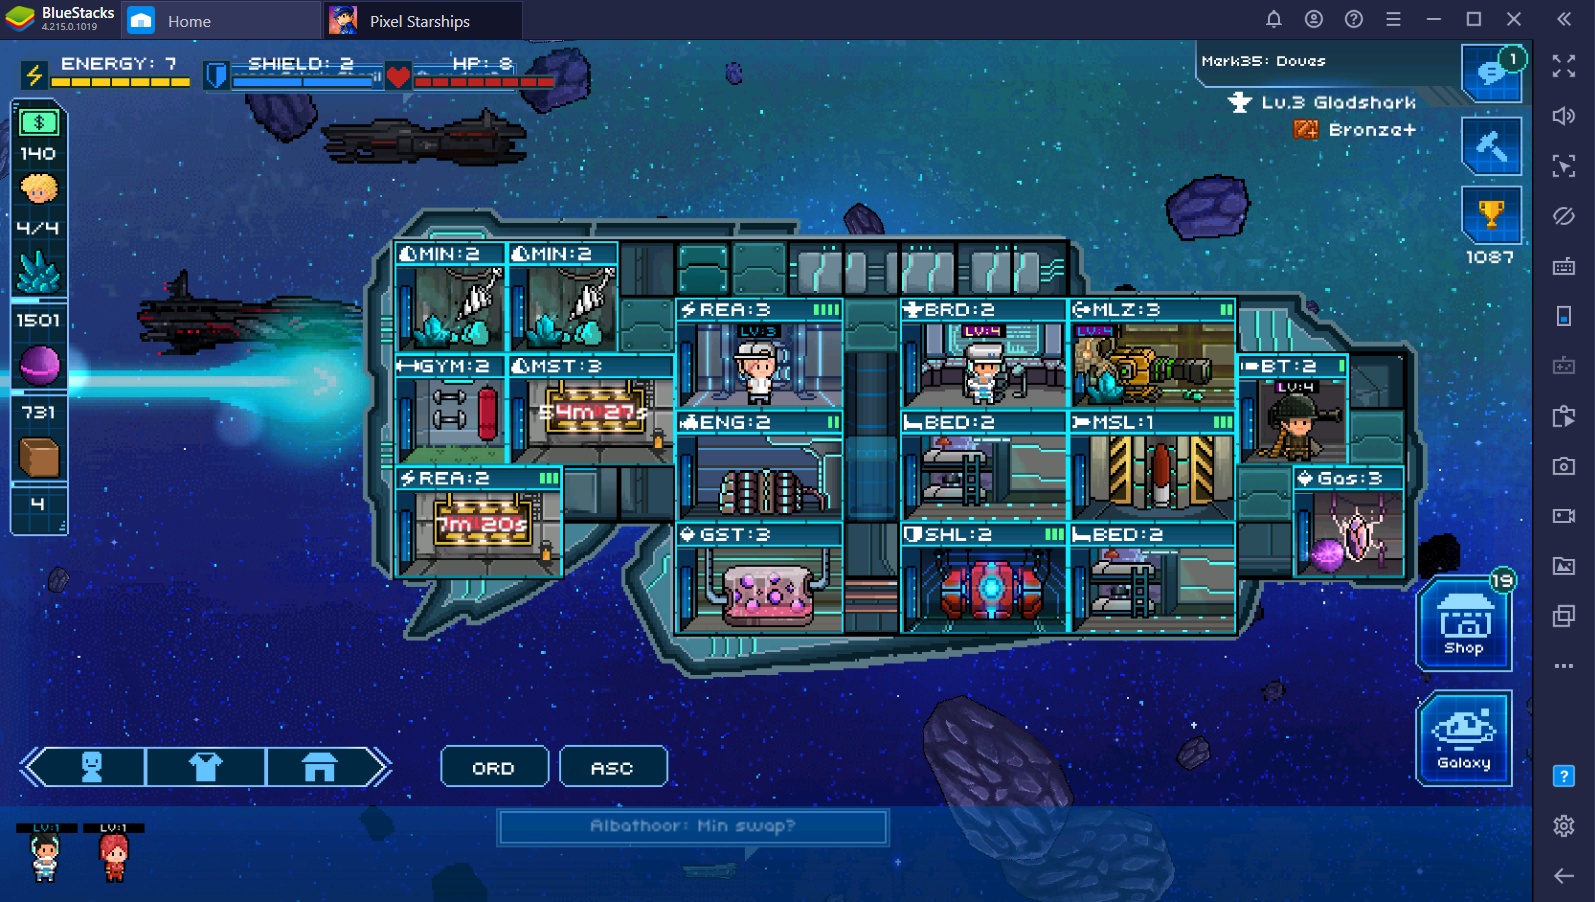 Intergalactic Review on Pixel Starships Galaxy with BlueStacks on PC